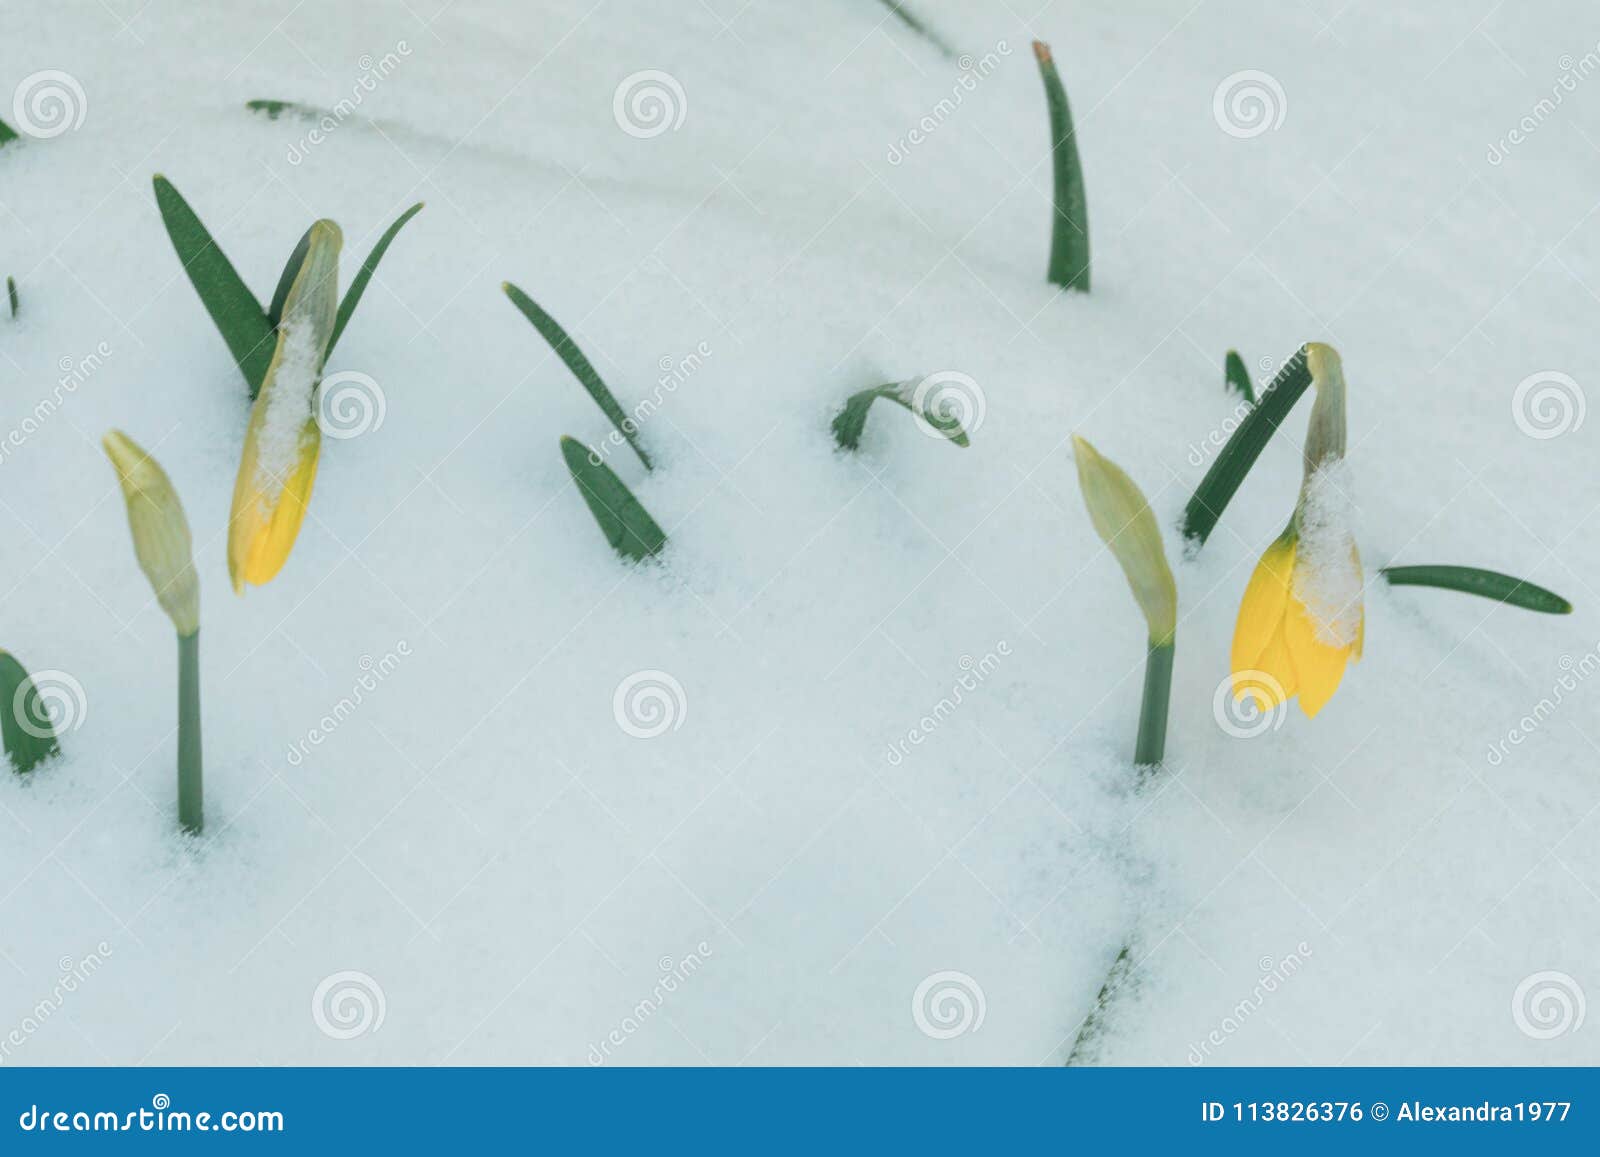 a tulip weighed down by heavy snow